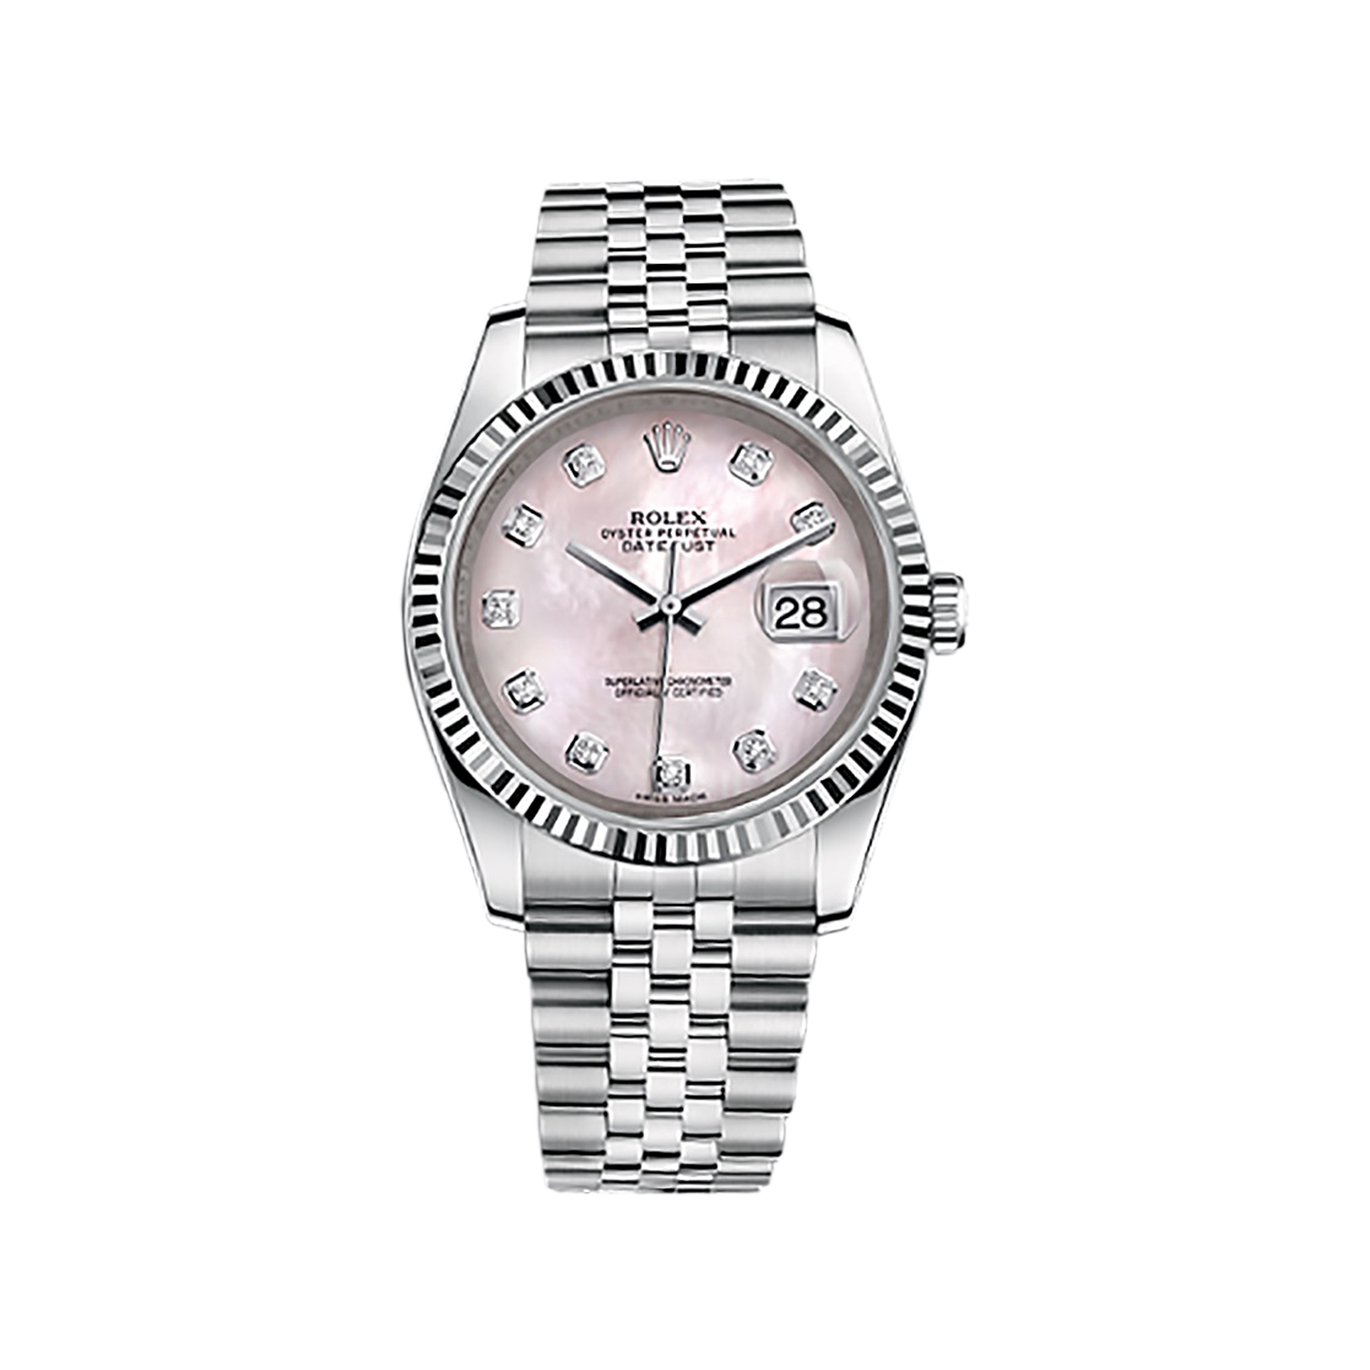 Datejust 36 116234 White Gold & Stainless Steel Watch (Pink Mother-of-Pearl Set with Diamonds) - Click Image to Close